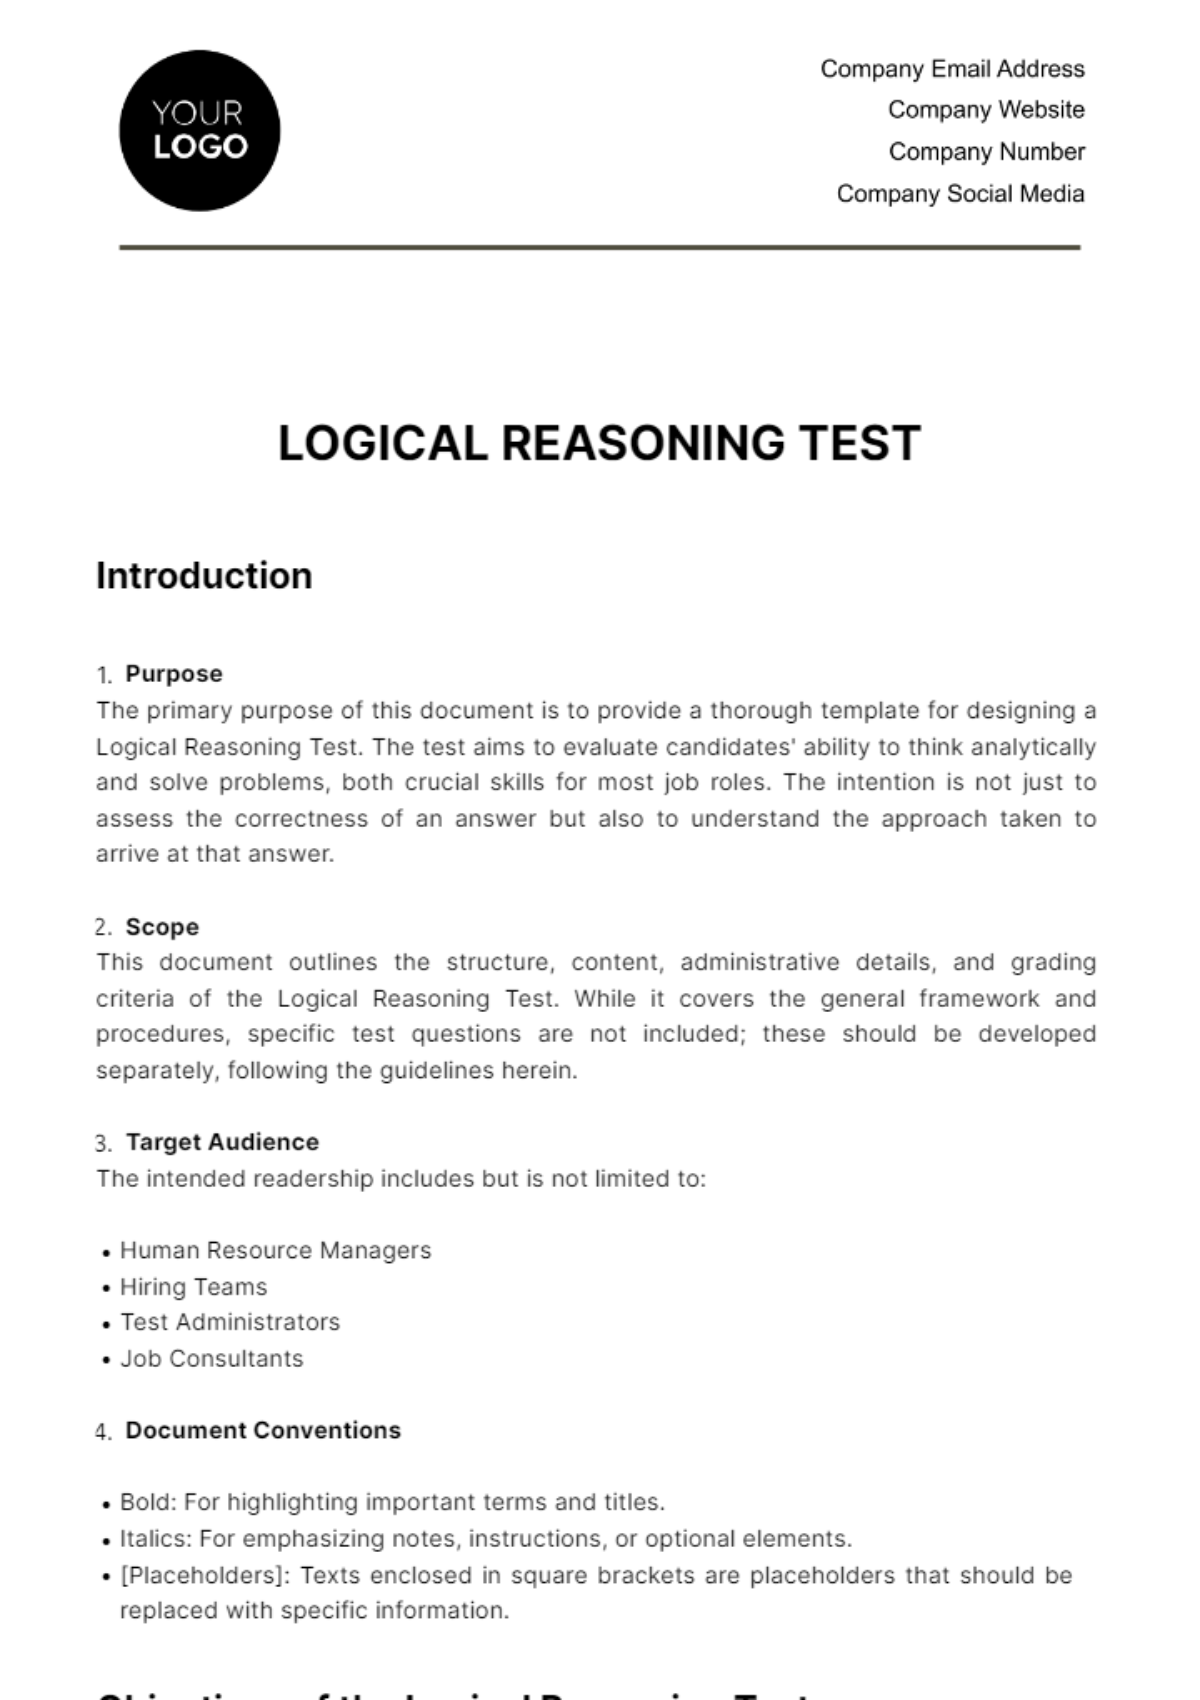 Free Logical Reasoning Test Template HR Template